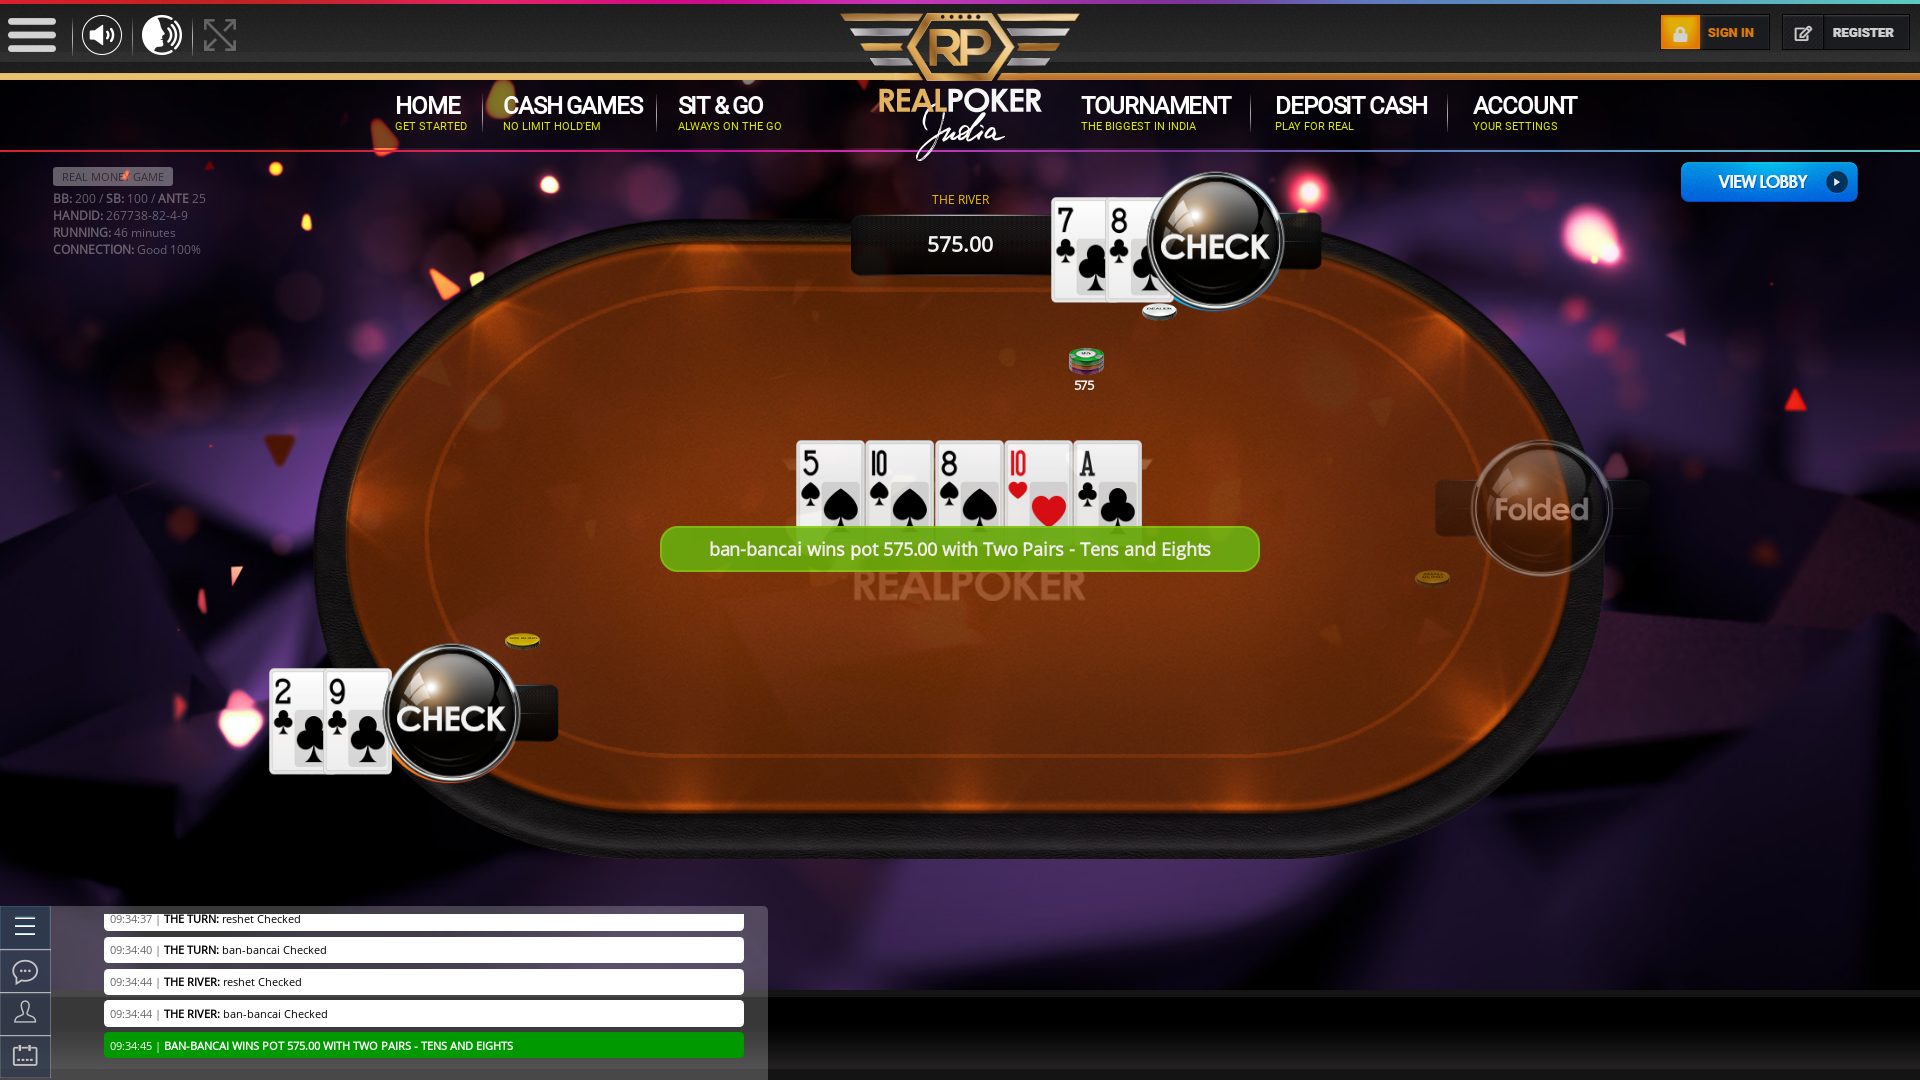 Online poker on a 10 player table in the 46th minute match up